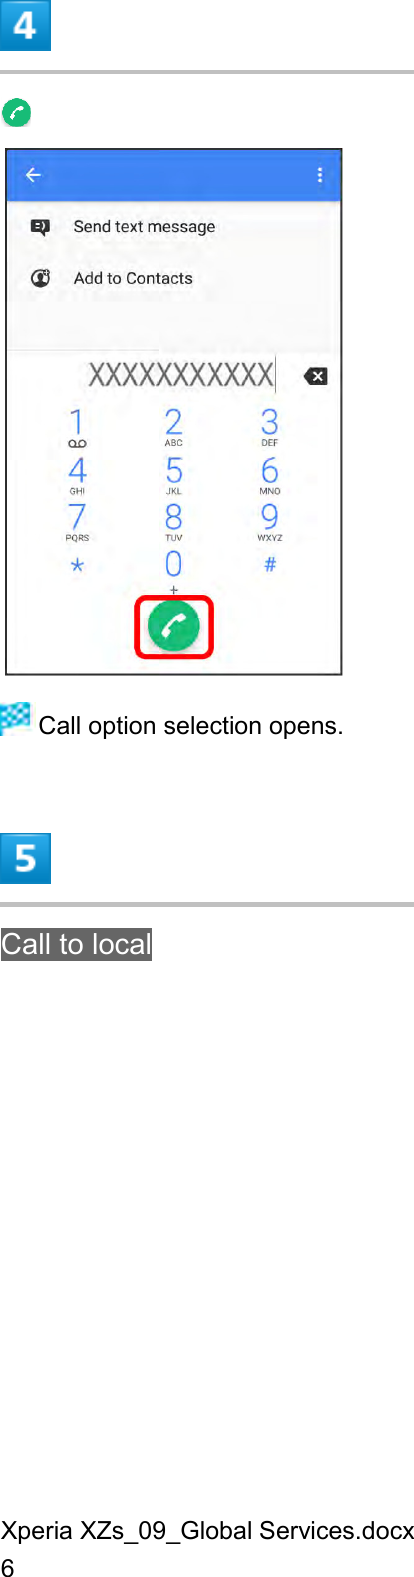 Xperia XZs_09_Global Services.docx 6     Call option selection opens.  Call to local 